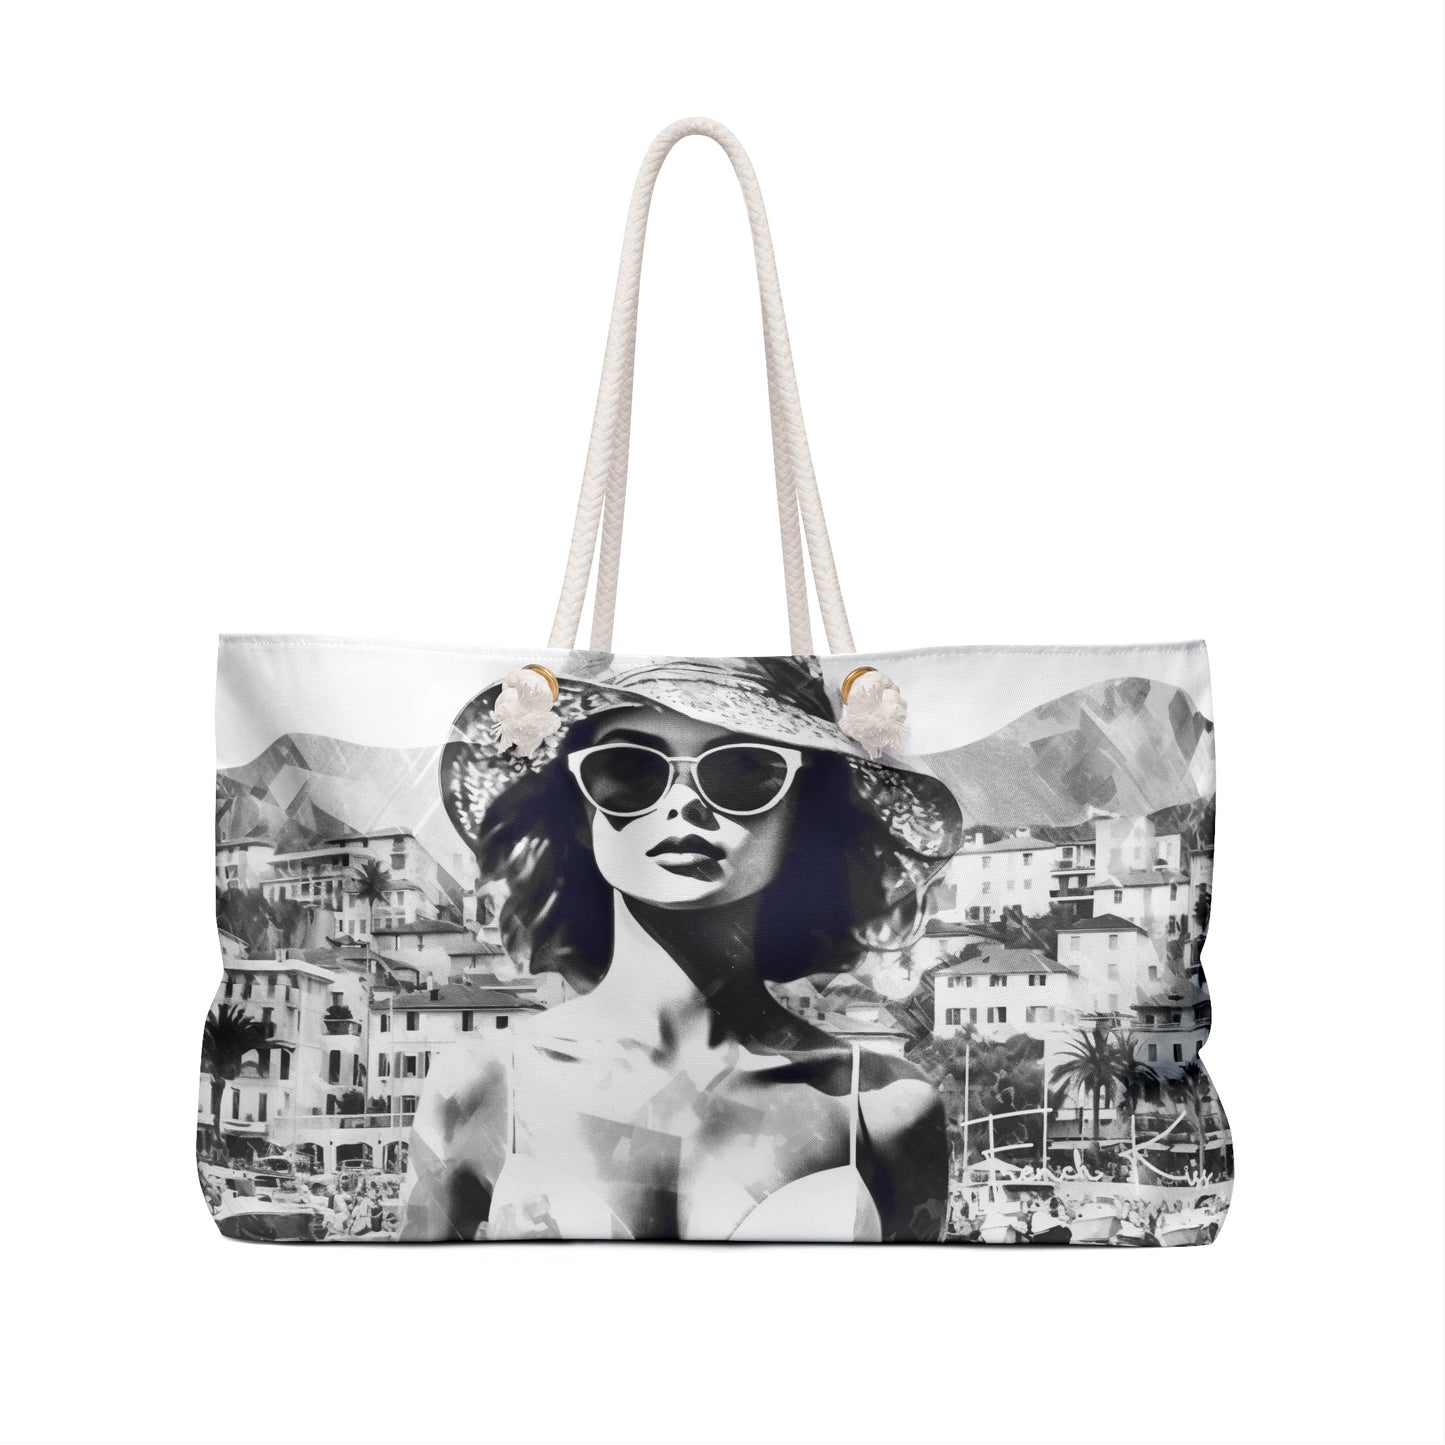 ANTIBES Sassy Sexy Chic Weekender Accessory Bag French Kiss Pop Art, Classy, Couture, Travel, Fashion, Beauty gift item